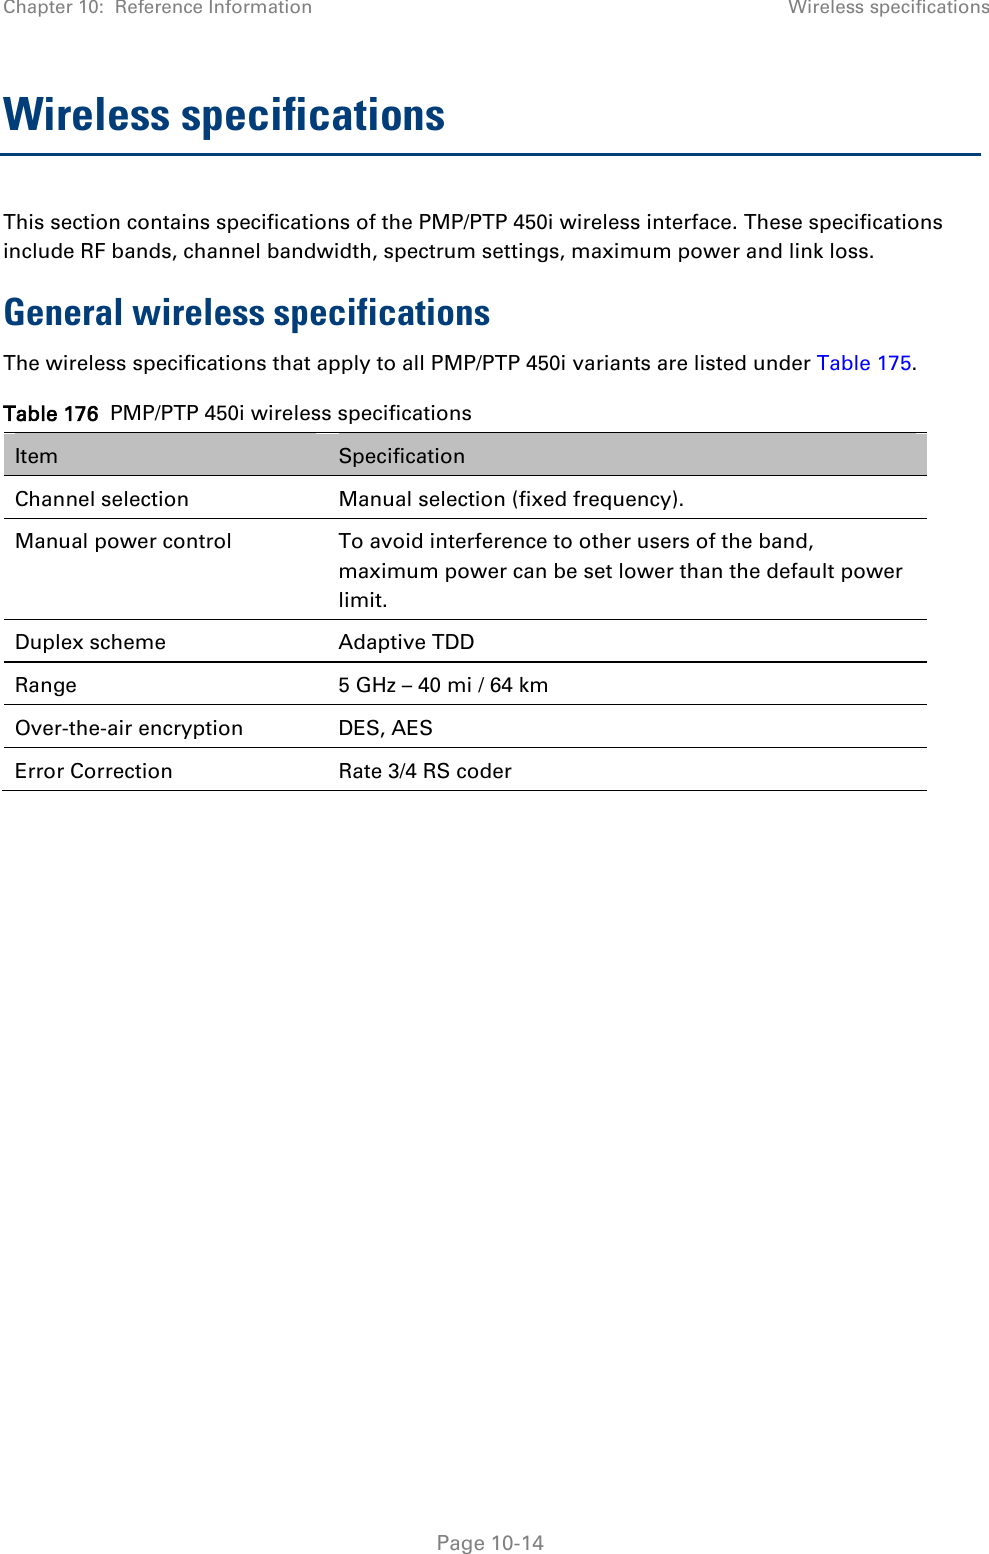 Chapter 10:  Reference Information Wireless specifications   Page 10-14 Wireless specifications This section contains specifications of the PMP/PTP 450i wireless interface. These specifications include RF bands, channel bandwidth, spectrum settings, maximum power and link loss. General wireless specifications The wireless specifications that apply to all PMP/PTP 450i variants are listed under Table 175. Table 176  PMP/PTP 450i wireless specifications Item Specification Channel selection Manual selection (fixed frequency). Manual power control  To avoid interference to other users of the band, maximum power can be set lower than the default power limit. Duplex scheme Adaptive TDD Range 5 GHz – 40 mi / 64 km Over-the-air encryption DES, AES Error Correction Rate 3/4 RS coder    